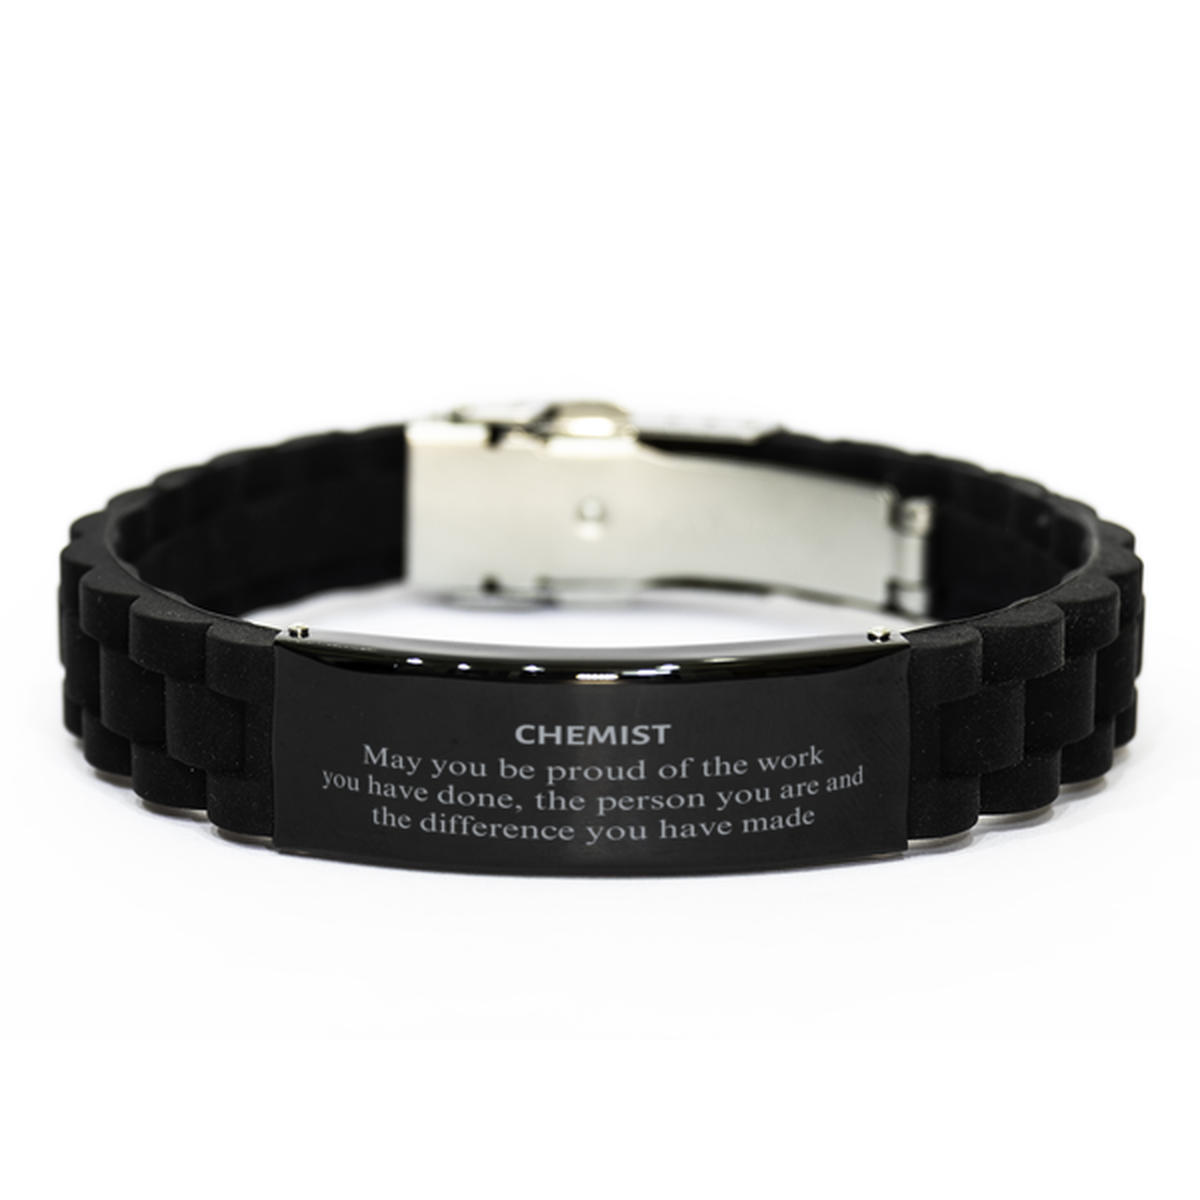 Chemist May you be proud of the work you have done, Retirement Chemist Black Glidelock Clasp Bracelet for Colleague Appreciation Gifts Amazing for Chemist